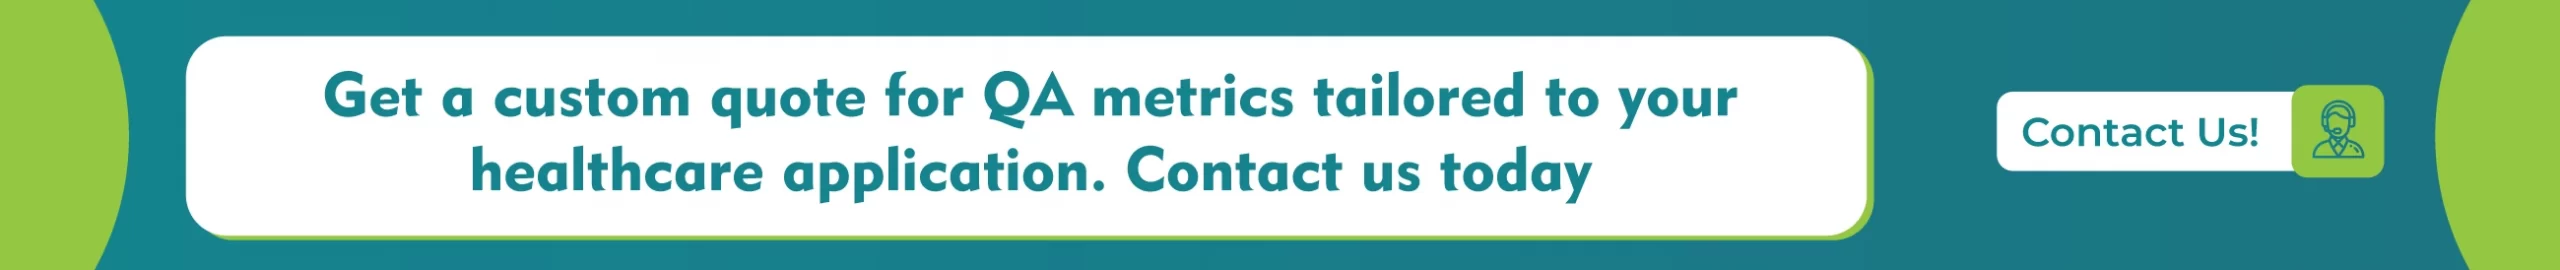 Get a custom quote for QA metrics tailored to your healthcare application Contact us today